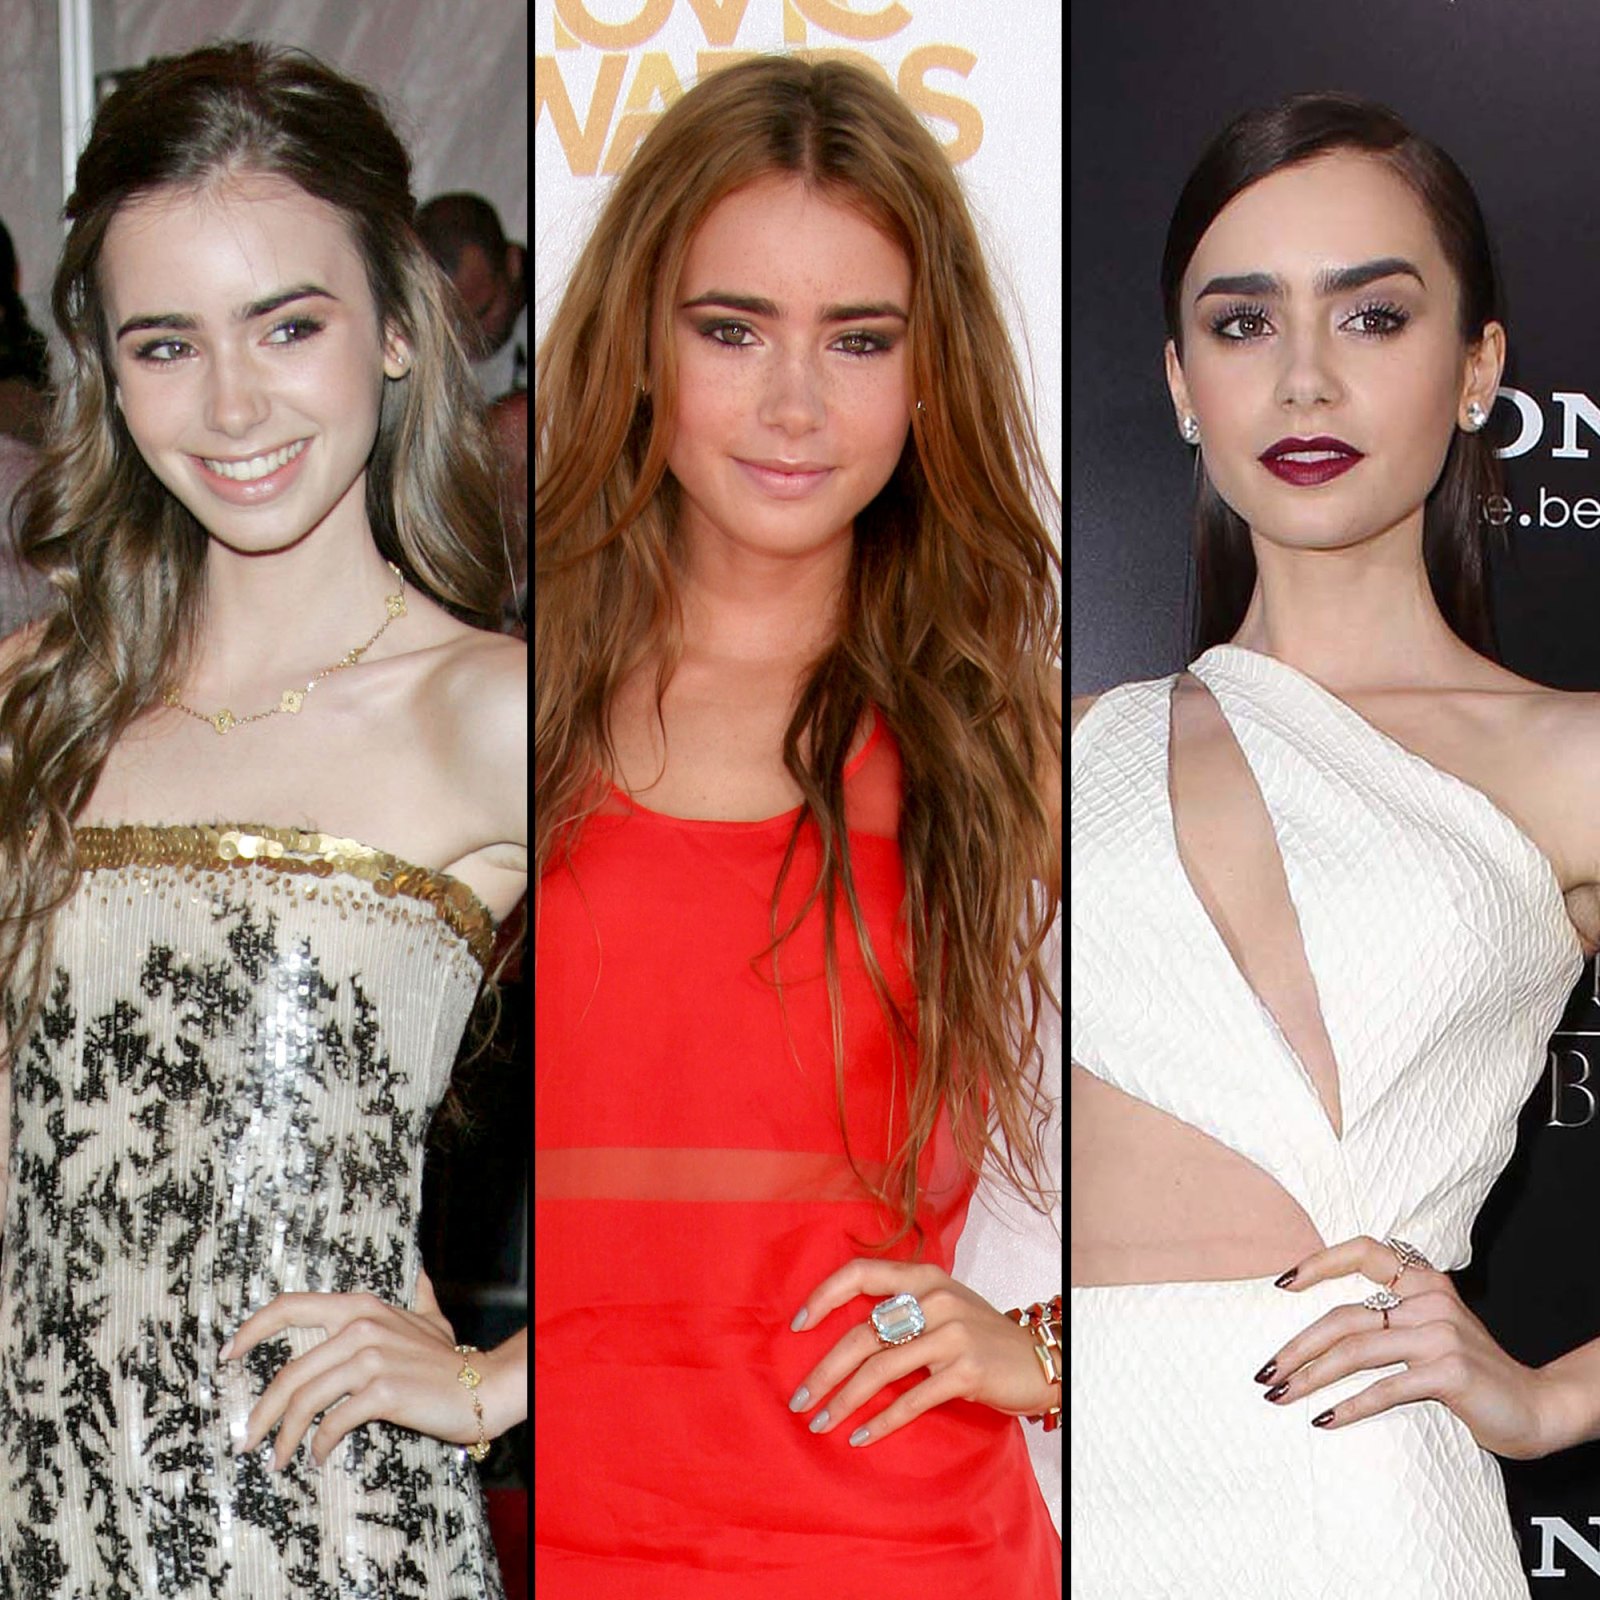 Lily Collins Dramatic Fashion Evolution Through the Years